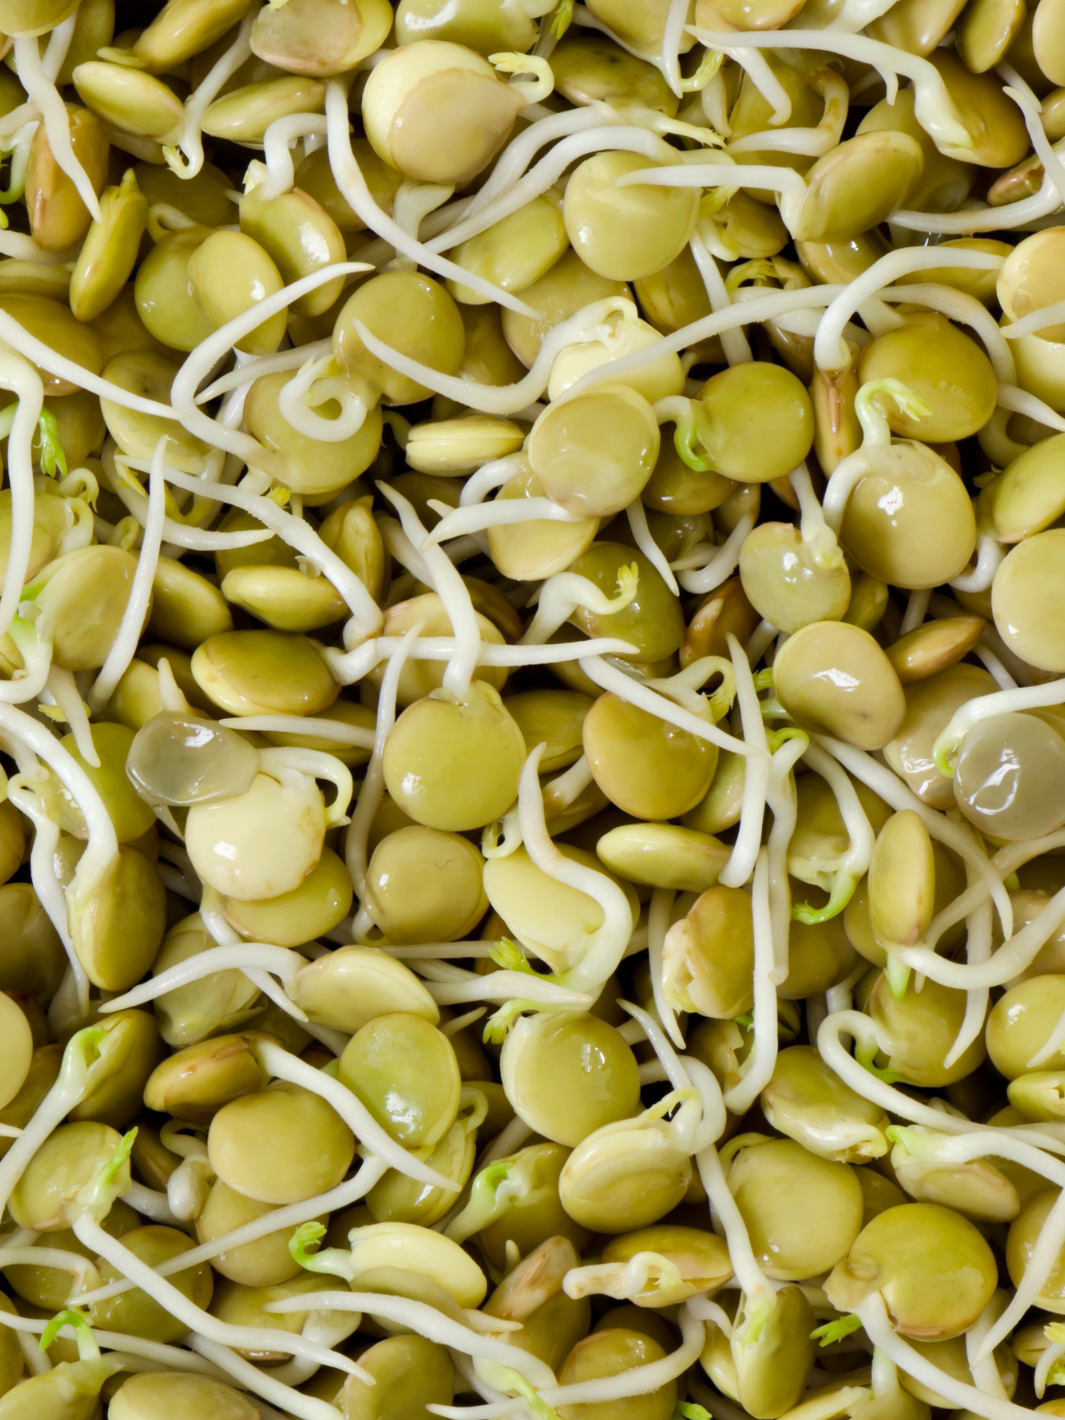 Green Lentil Sprouts Grown with Organic 5 Part Salad Mix Sprouting Seeds